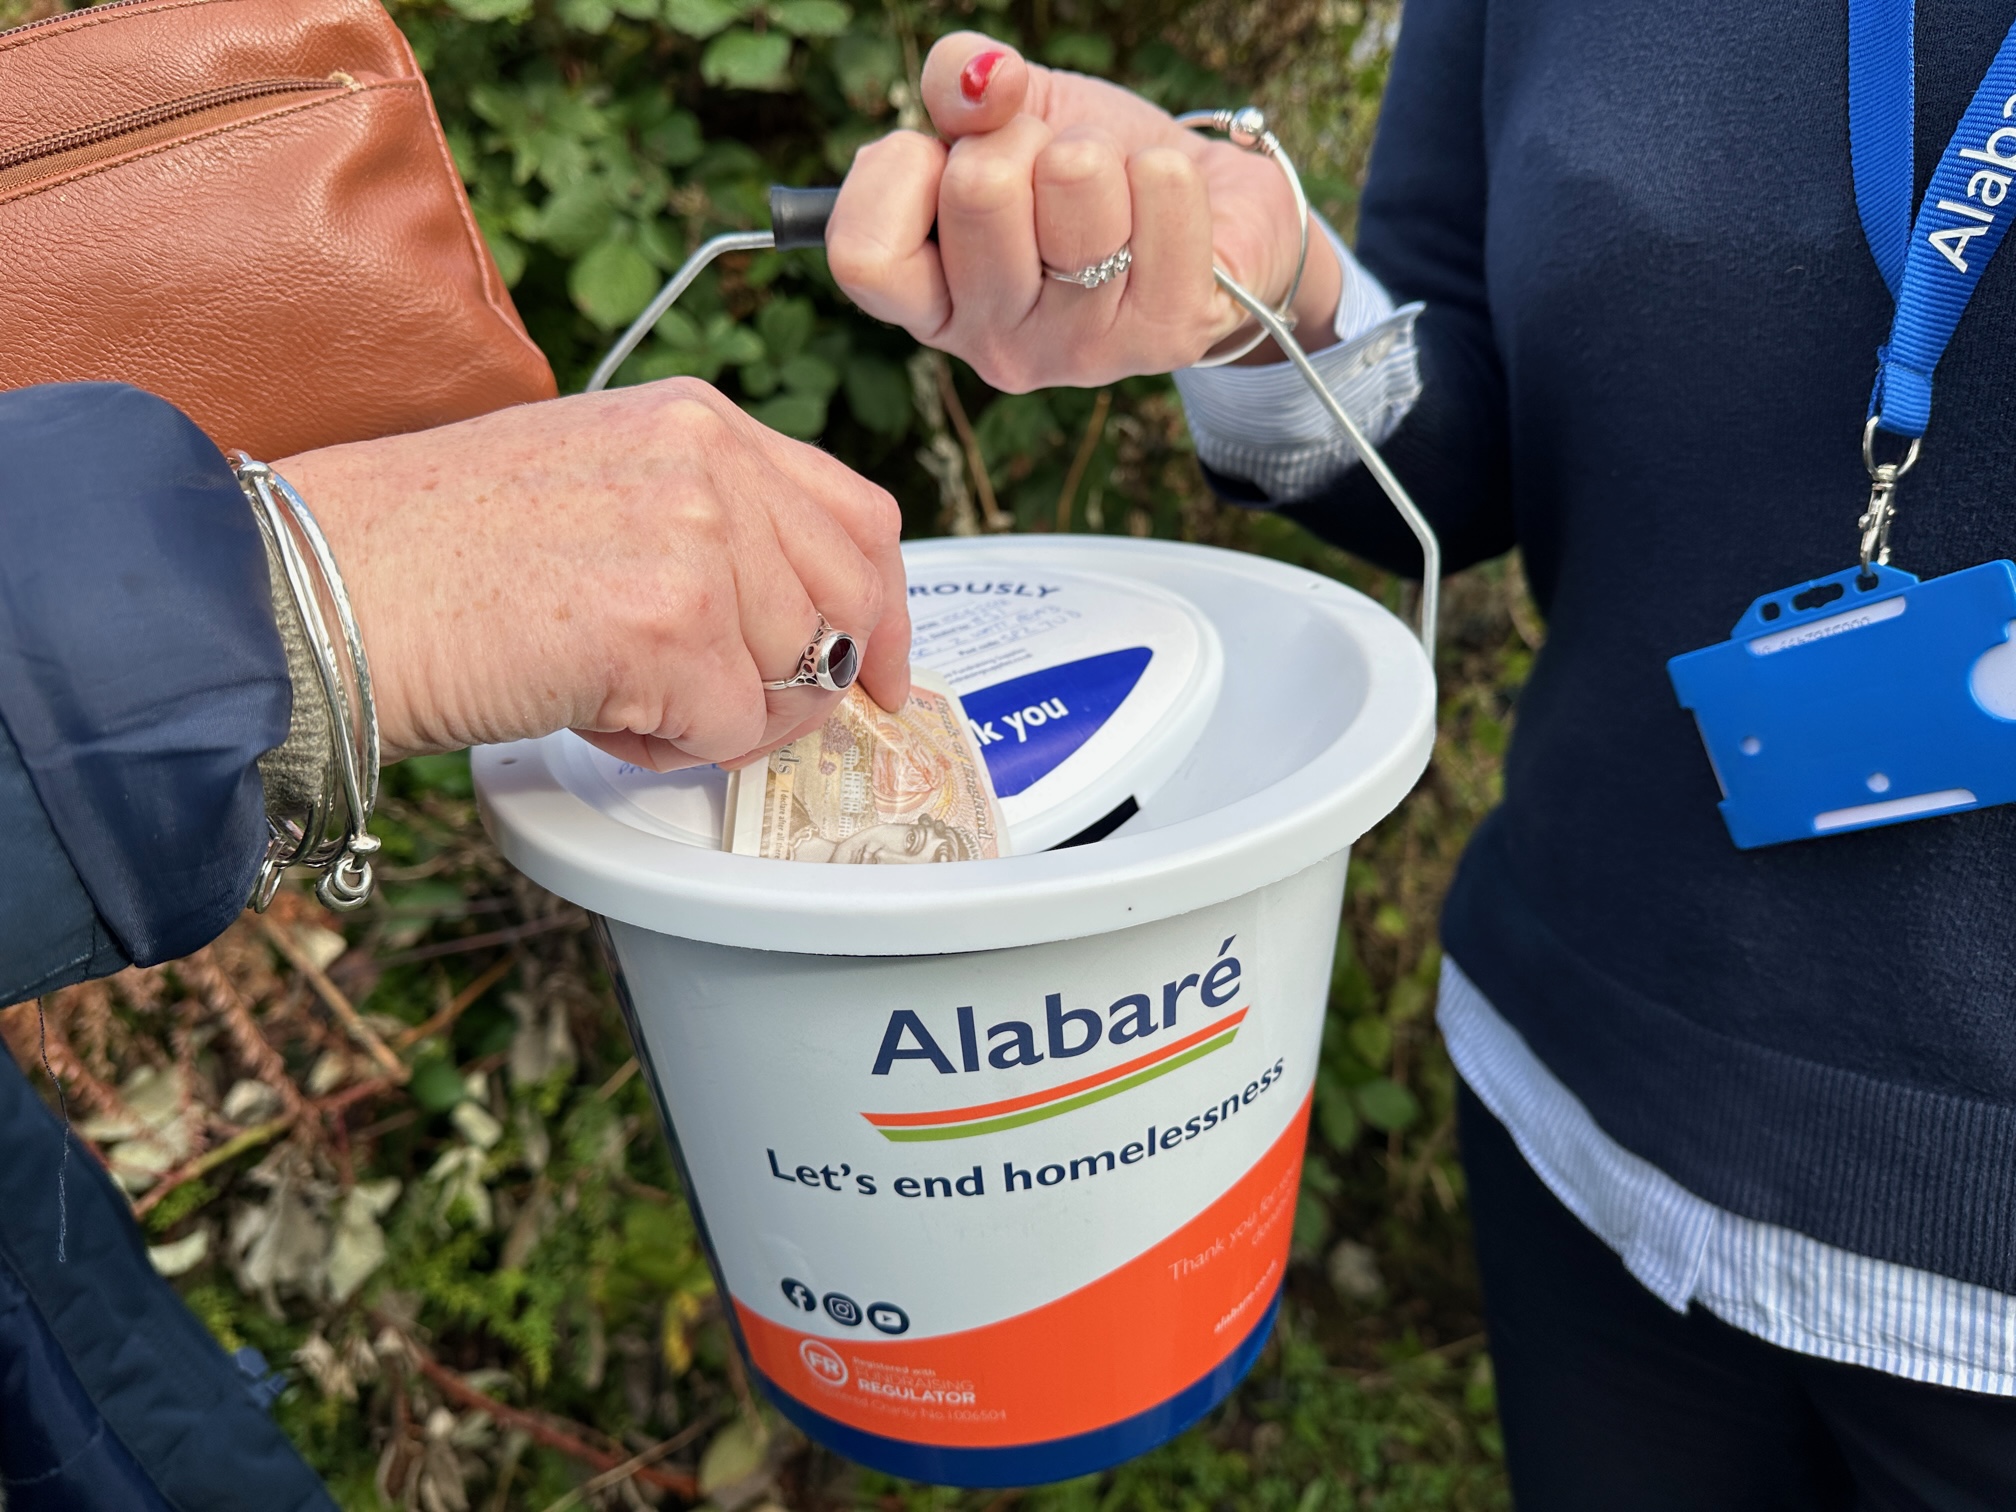 Donate to Alabare. Give money to Alabare.